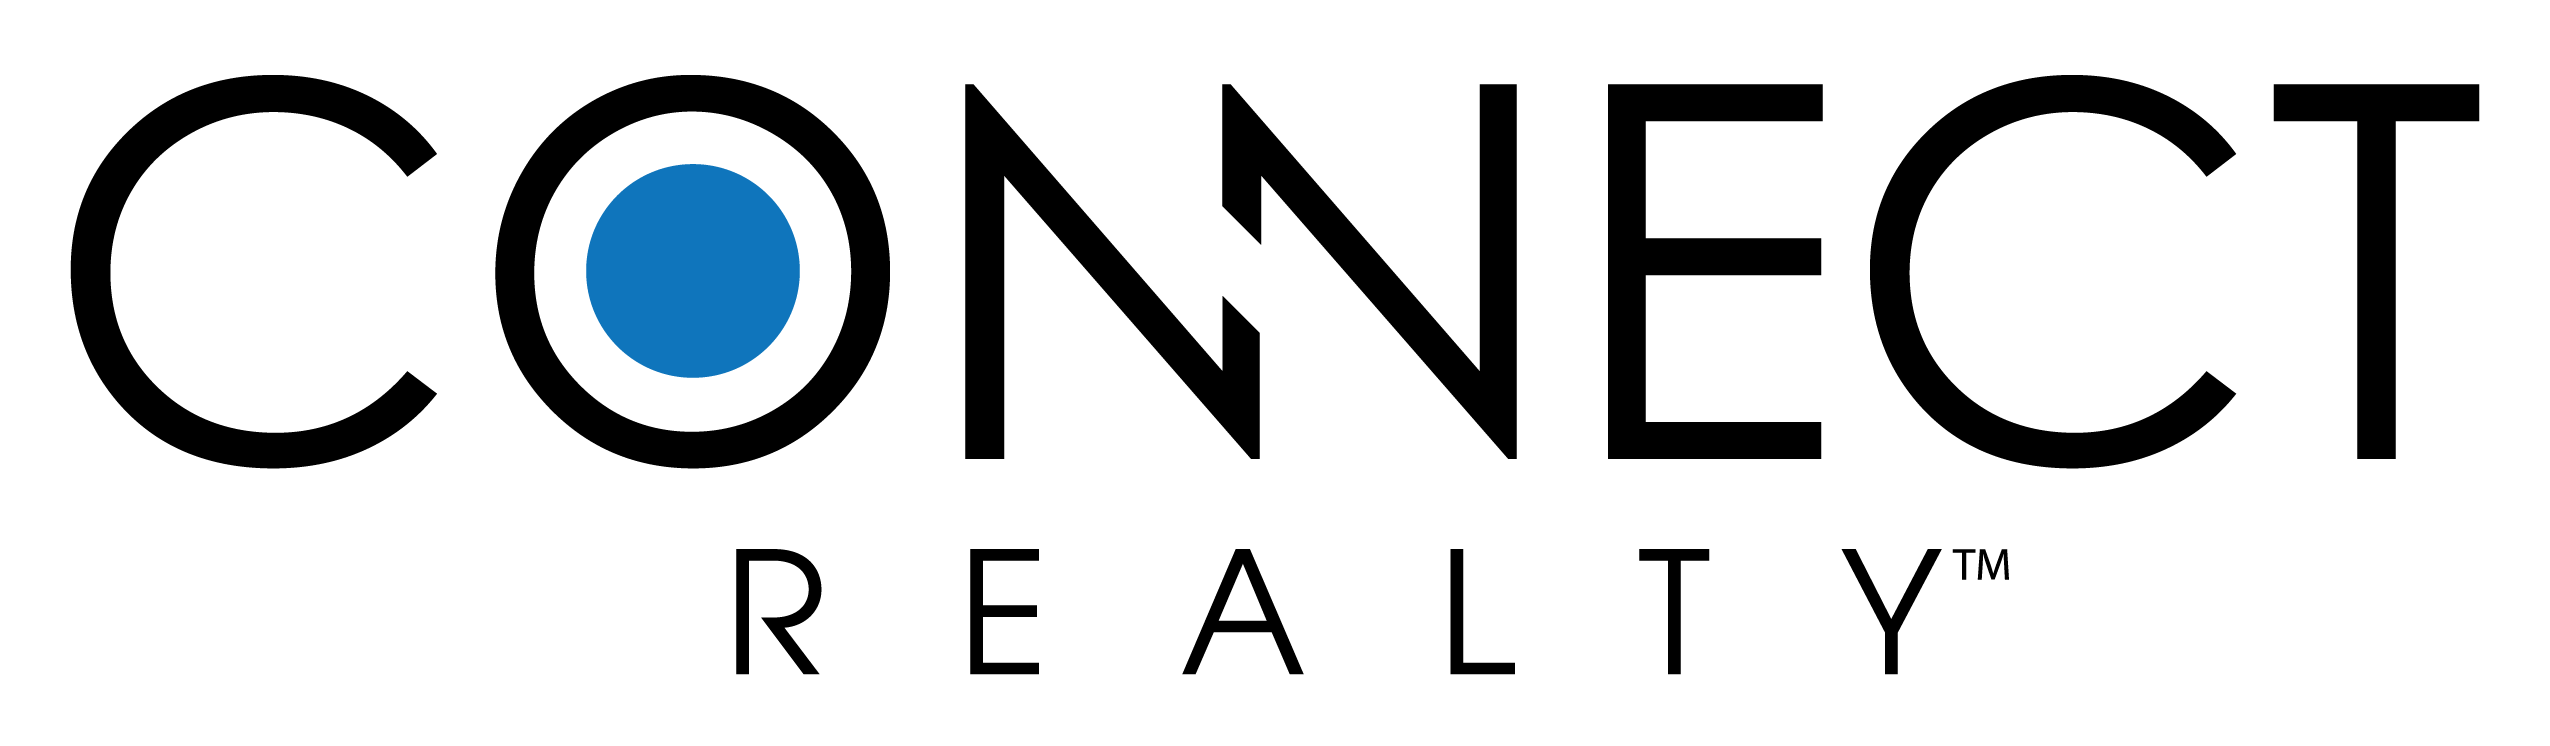 Connect Realty - South AZ